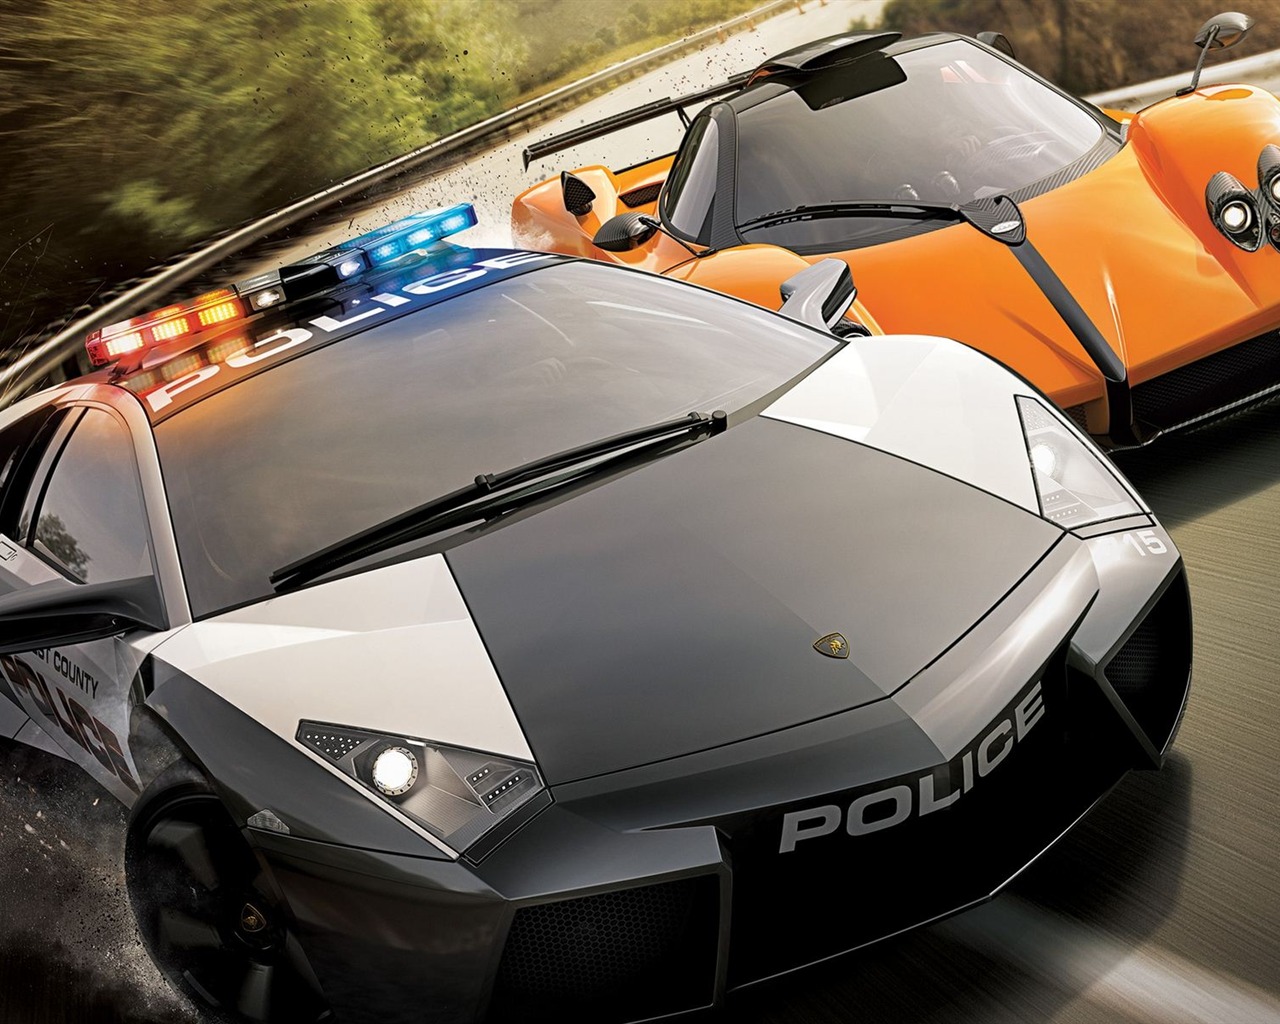 Need for Speed: Hot Pursuit 極品飛車14：熱力追踪 #3 - 1280x1024